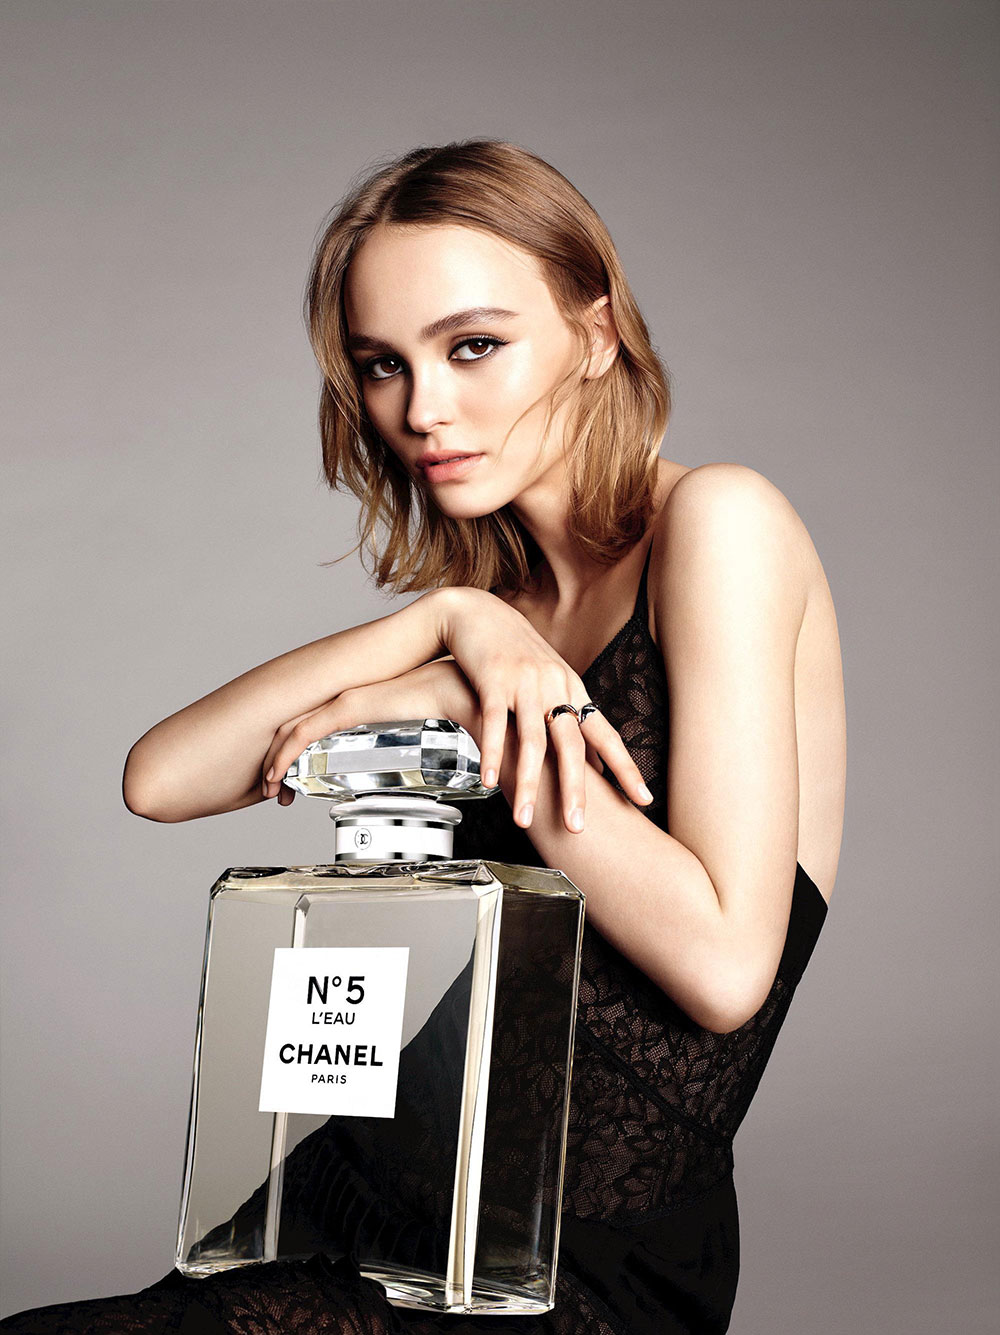 Lily-Rose Depp Is The New Face Of Chanel Fragrance